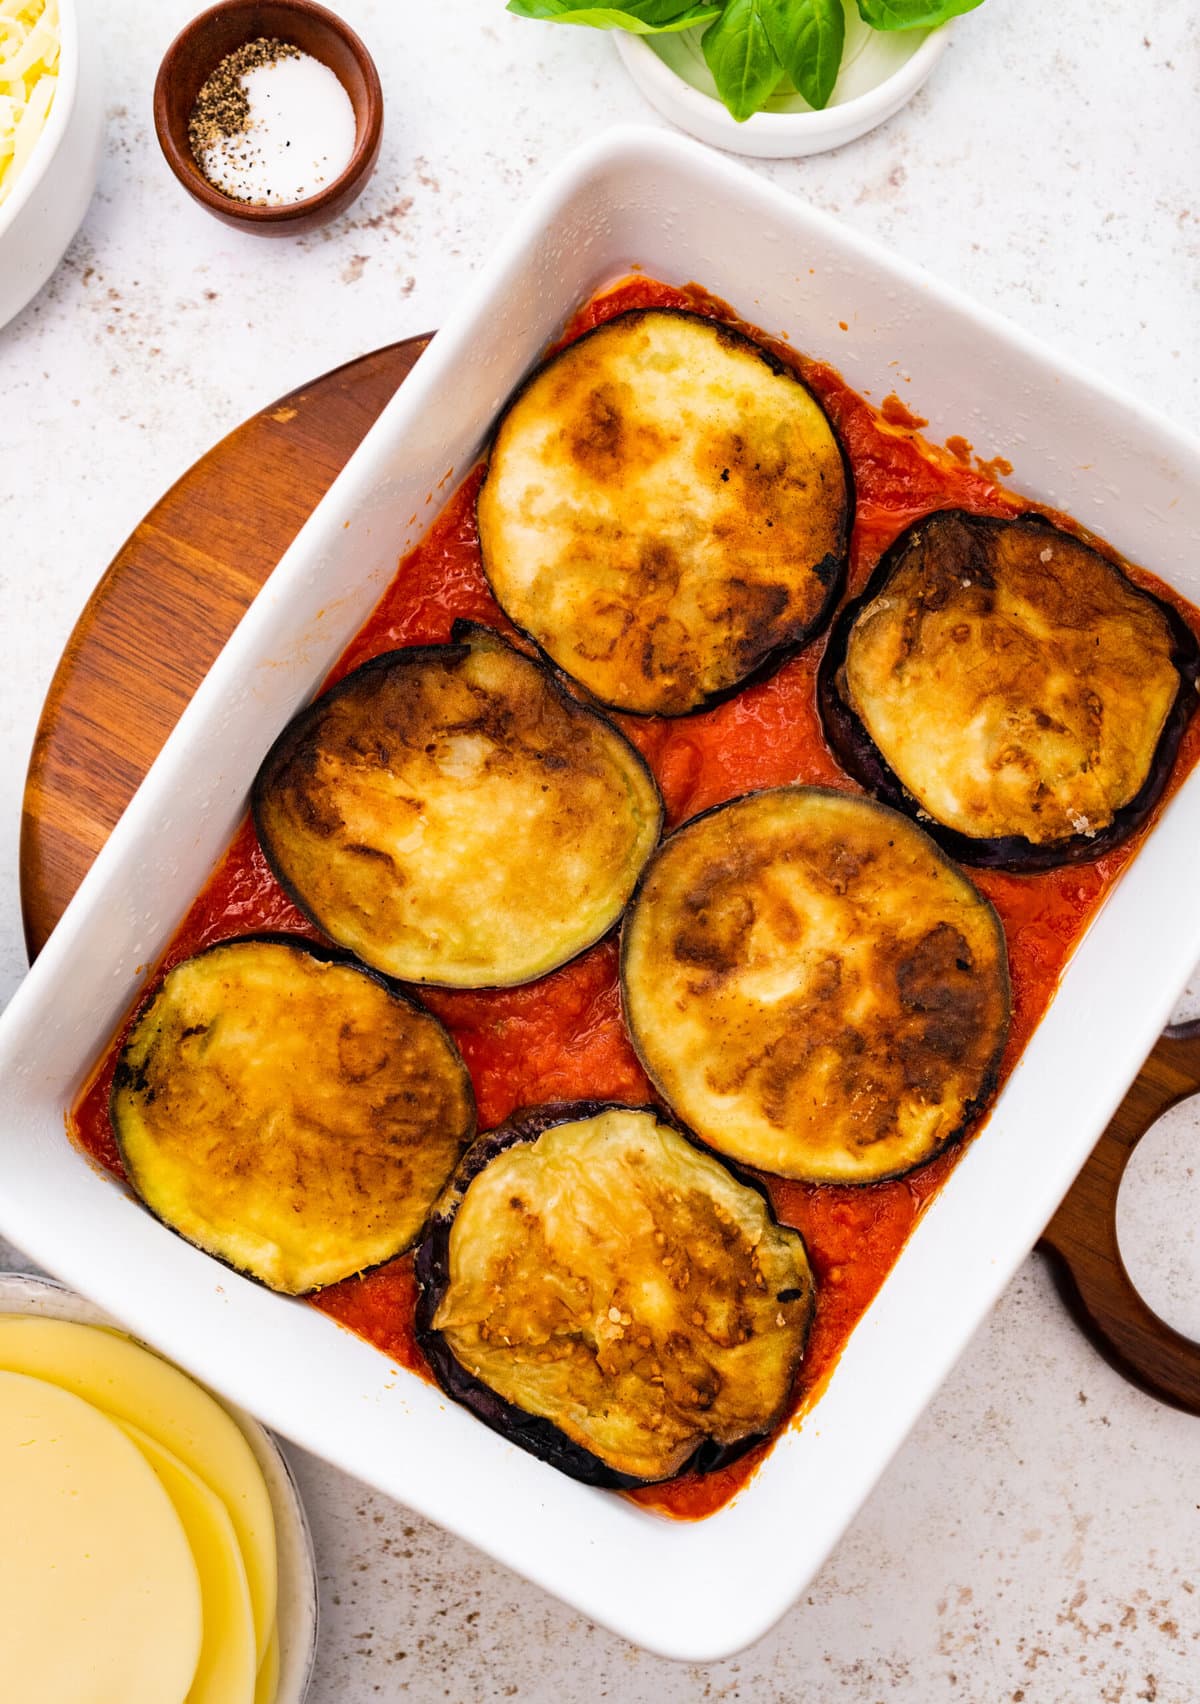 how to make eggplant parmigiana step-by-step: layering the fried eggplant on top of the homemade sauce.